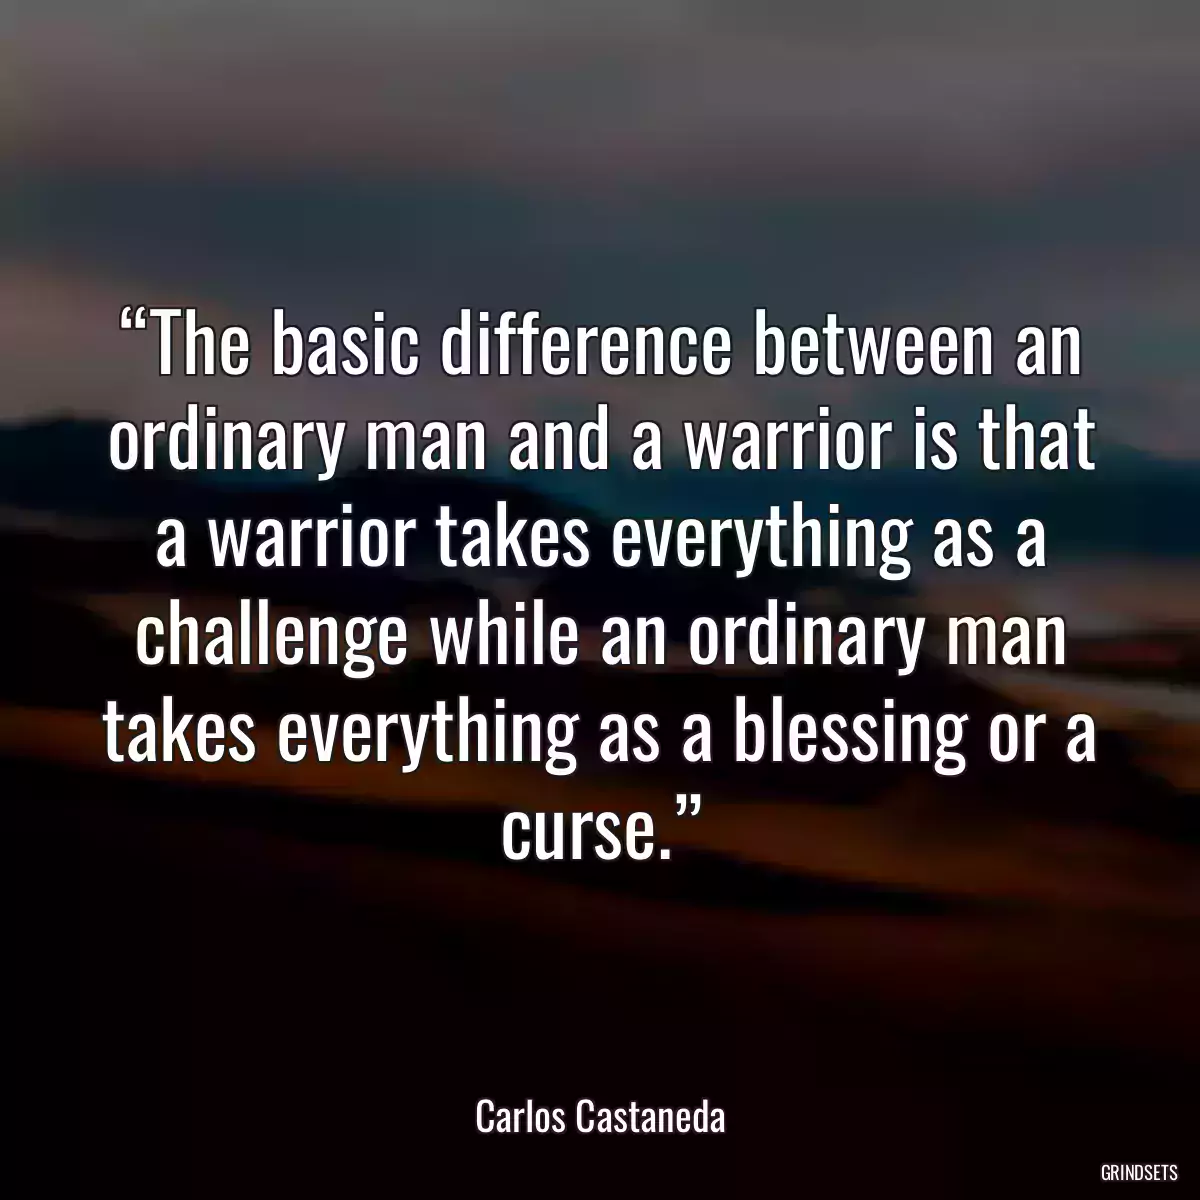 “The basic difference between an ordinary man and a warrior is that a warrior takes everything as a challenge while an ordinary man takes everything as a blessing or a curse.”